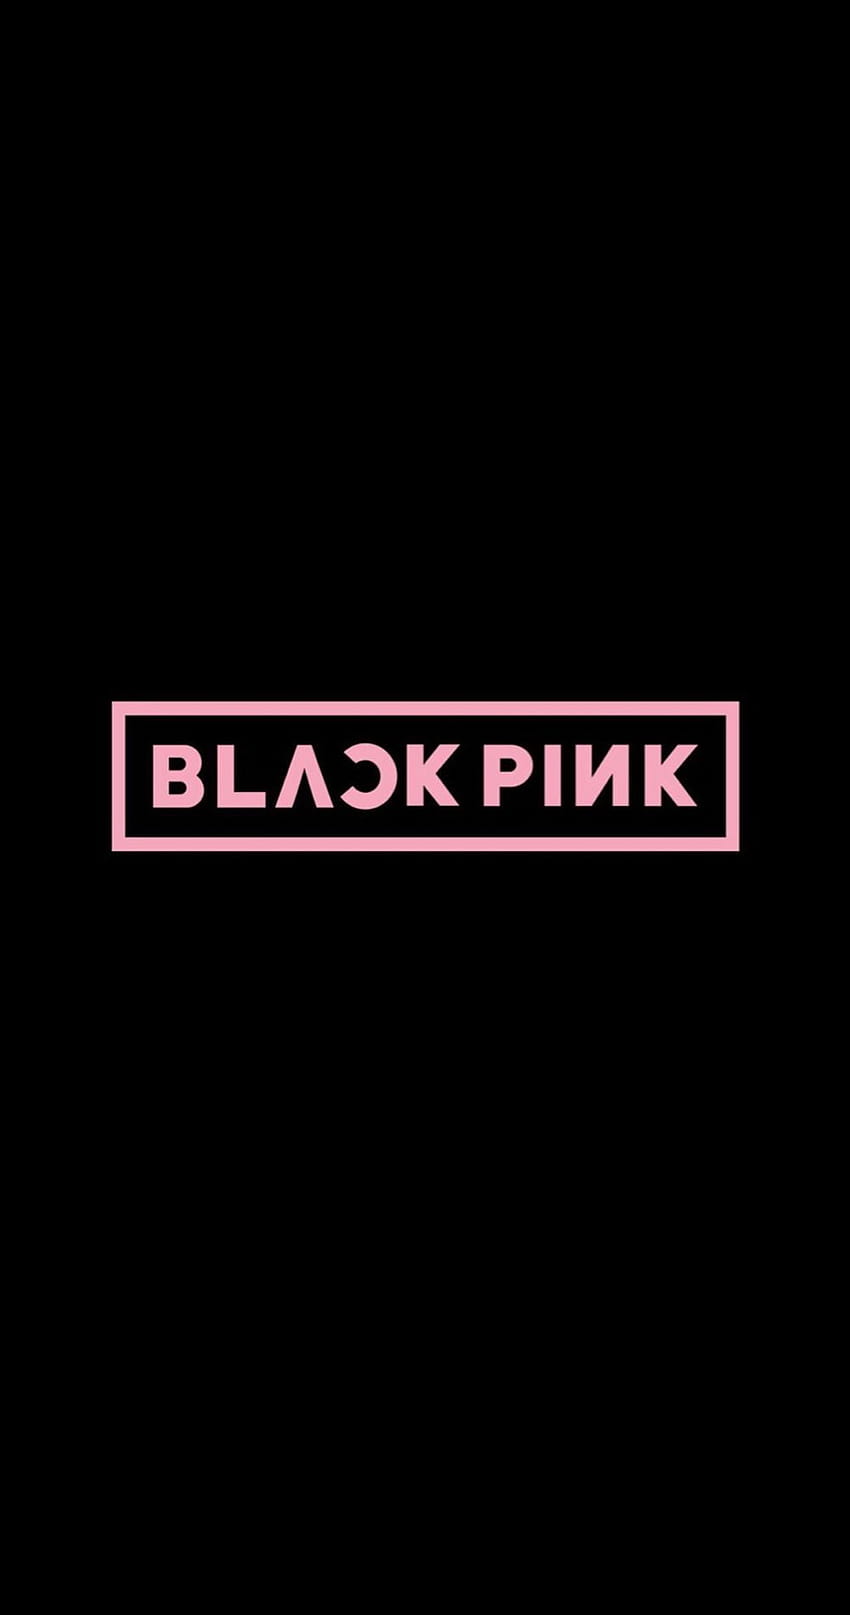 BLACKPINK logo ! Please like or reblog if you use them! Please do not repost! HD phone wallpaper